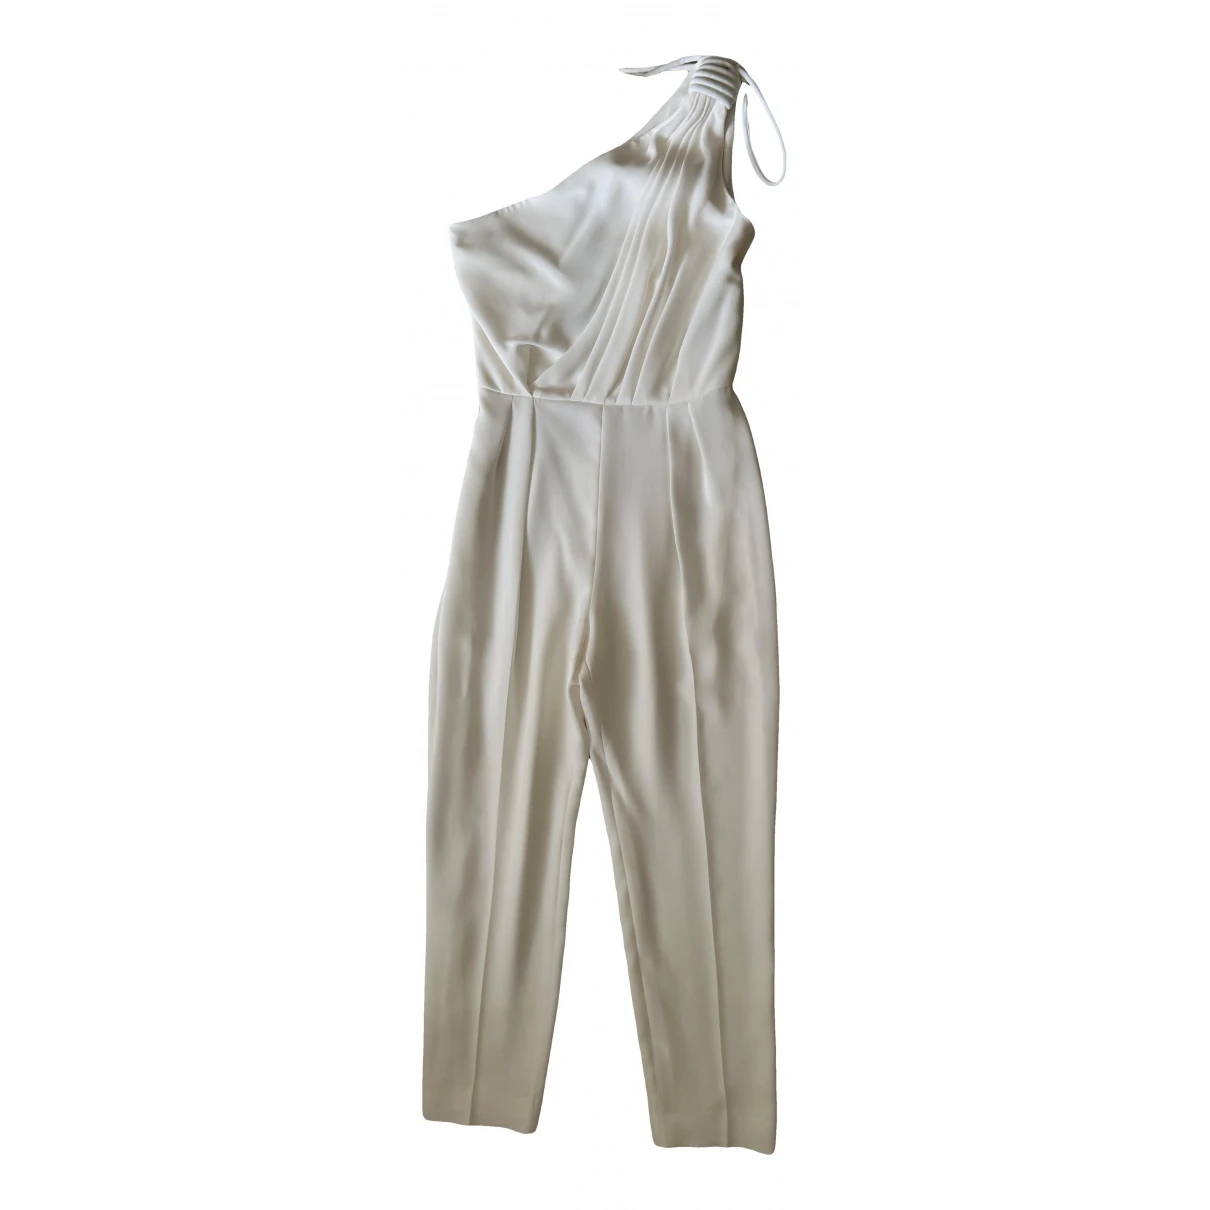 clothing Max Mara jumpsuits for Female Polyester 38 IT. Used condition